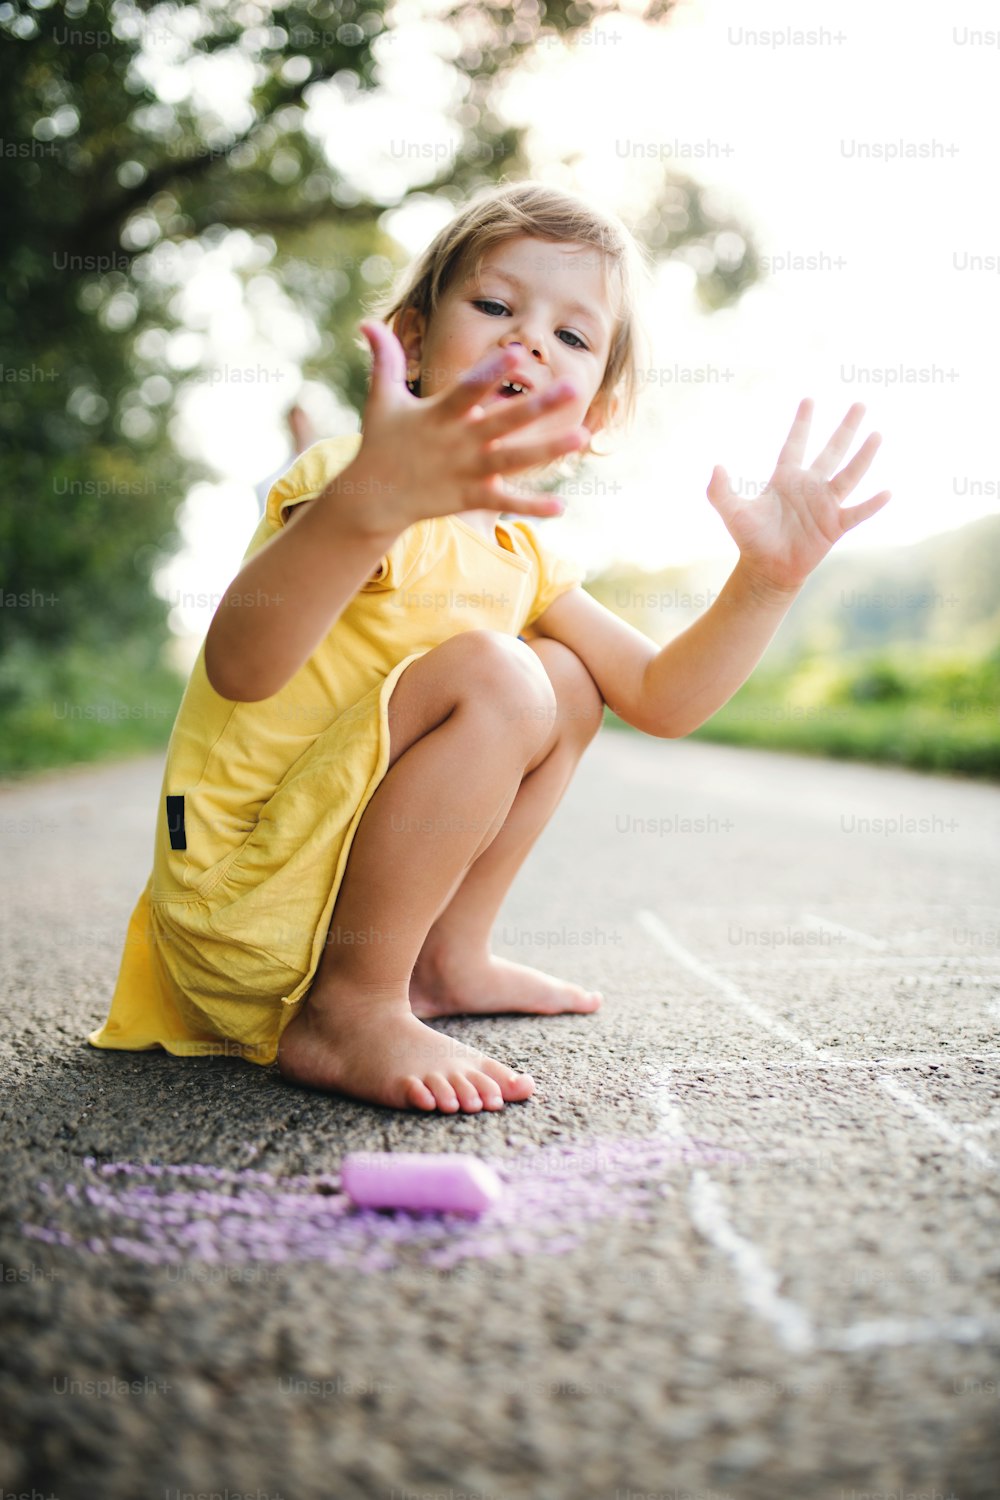 A small cute girl on a road in countryside in sunny summer nature, drawing with chalk.